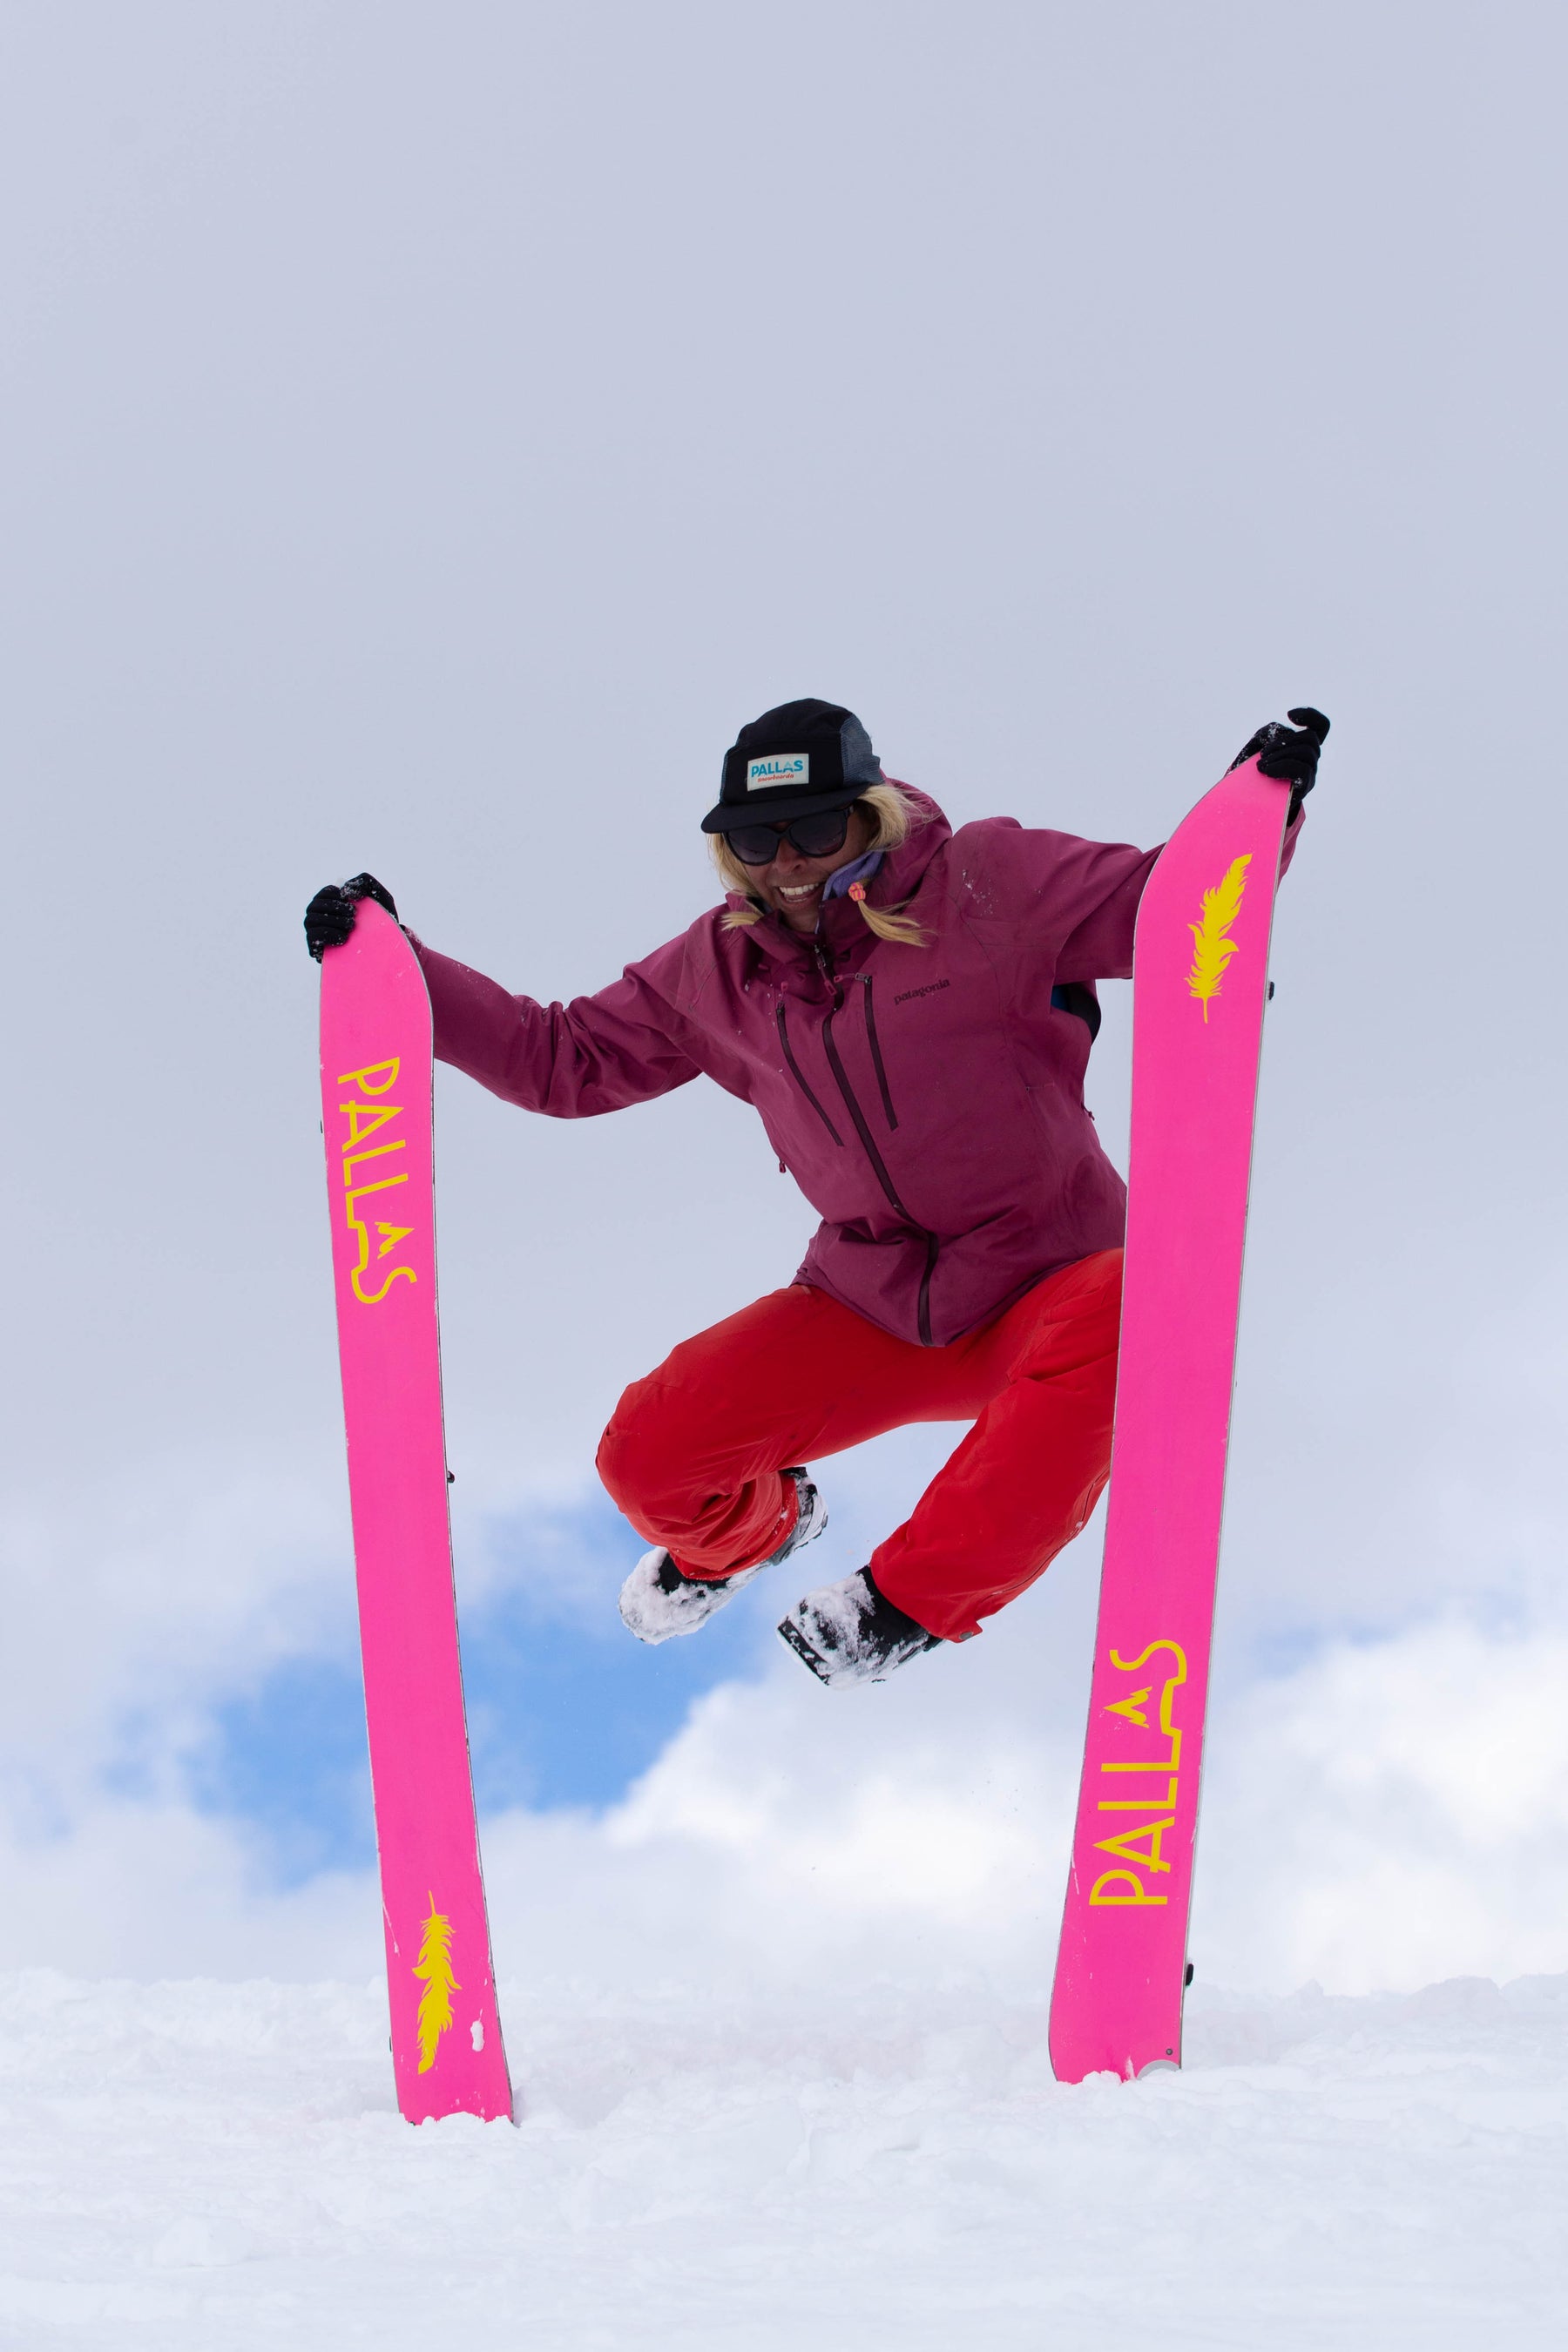 A woman is holding the skis of her Pallas splitboards upright in the snow while she jumps in the air. The base of the skis are bright pink and the woman is smiling in the air.